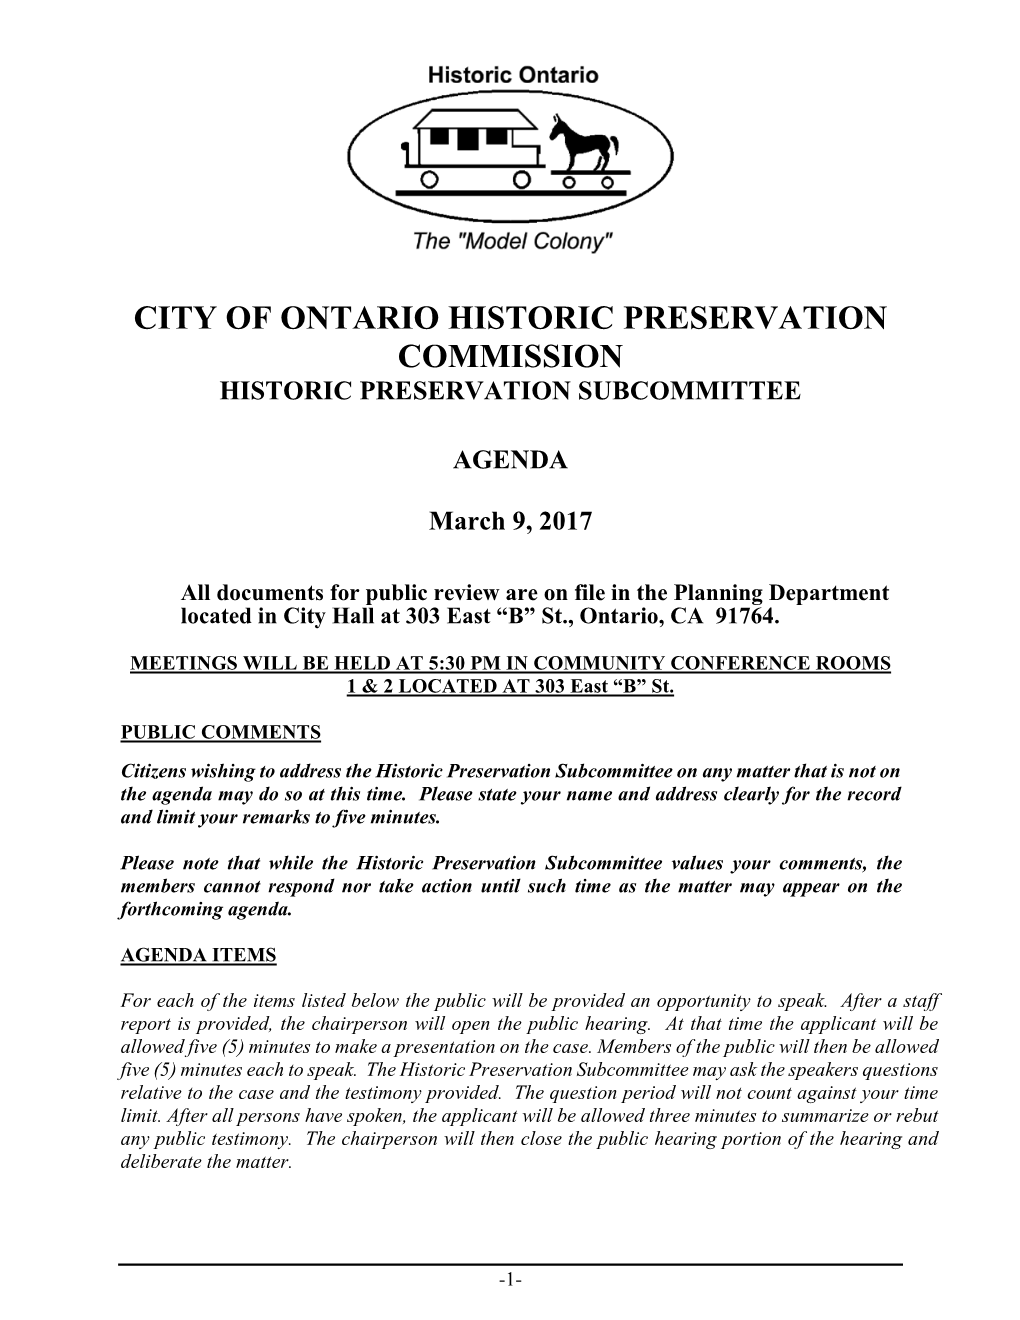 City of Ontario Historic Preservation Commission Historic Preservation Subcommittee